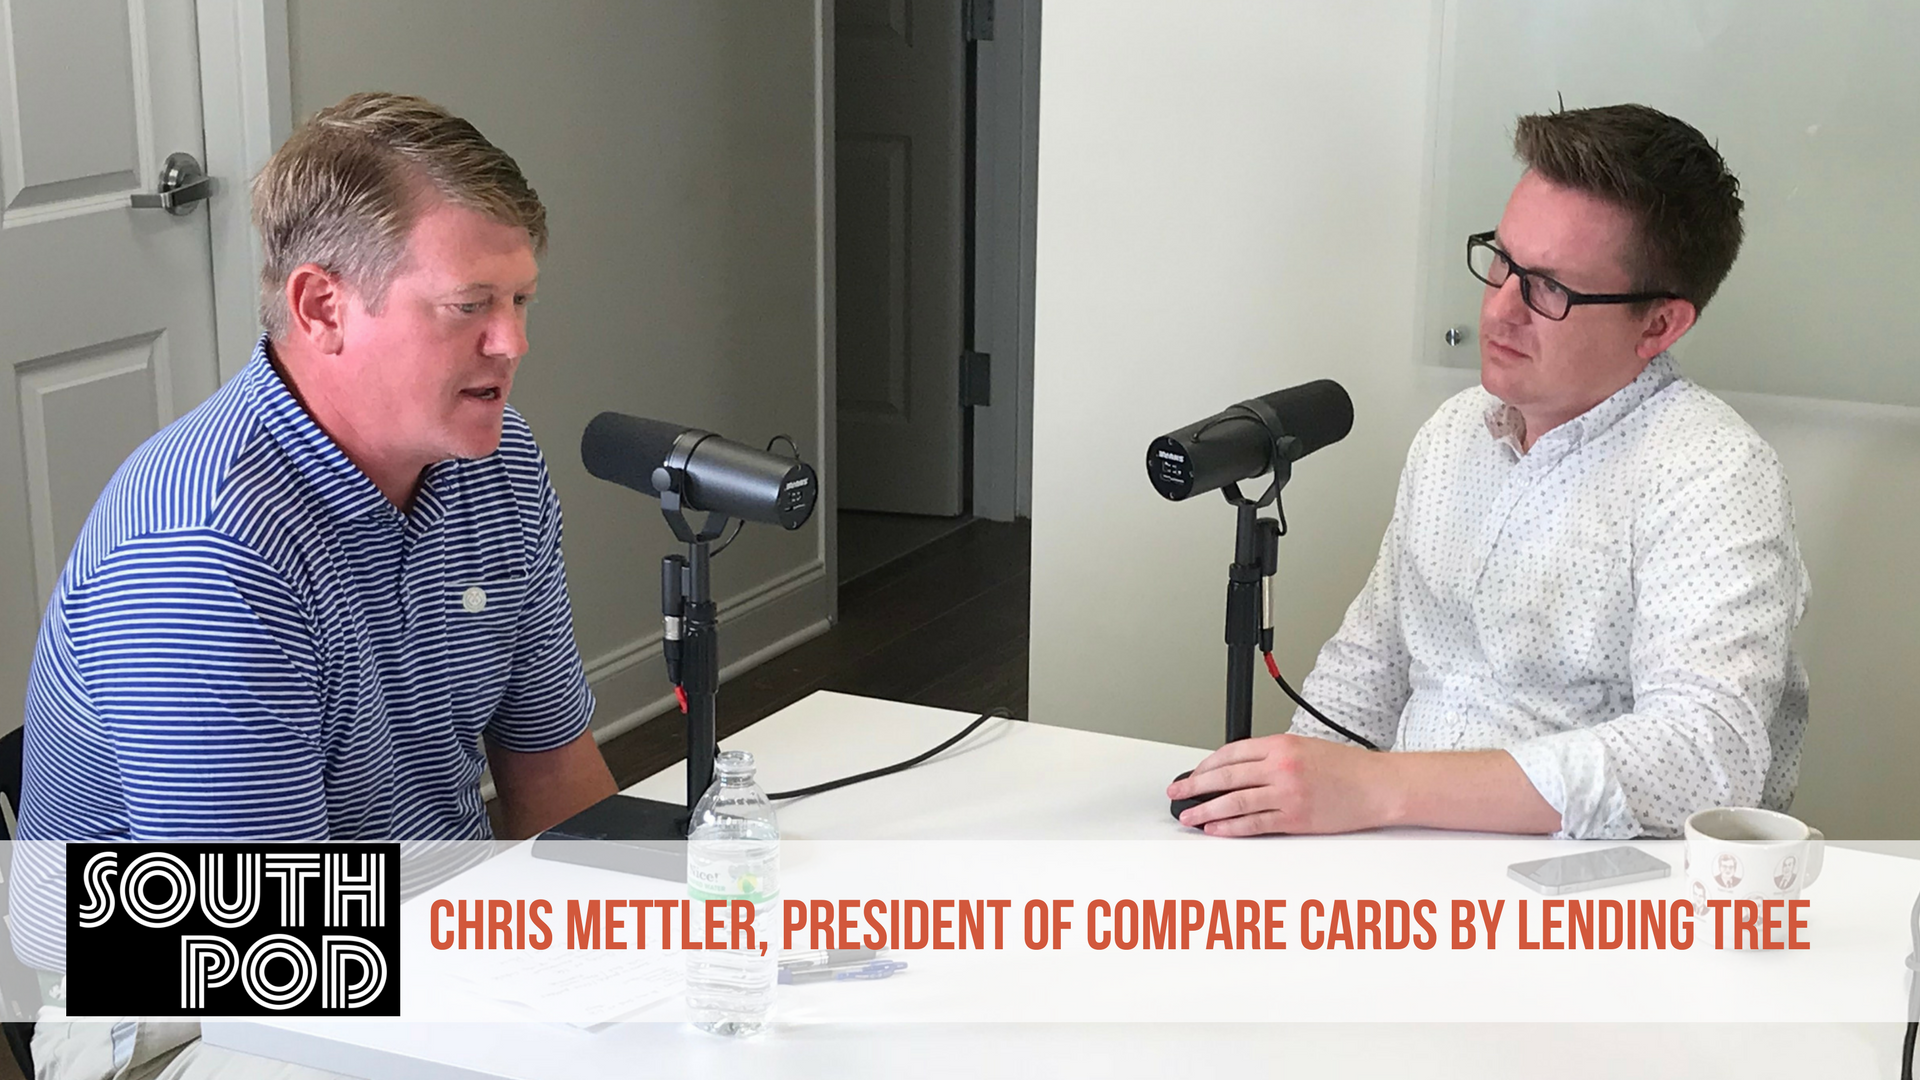 Ch-ching! Making Money Online with Compare Cards Founder Chris Mettler